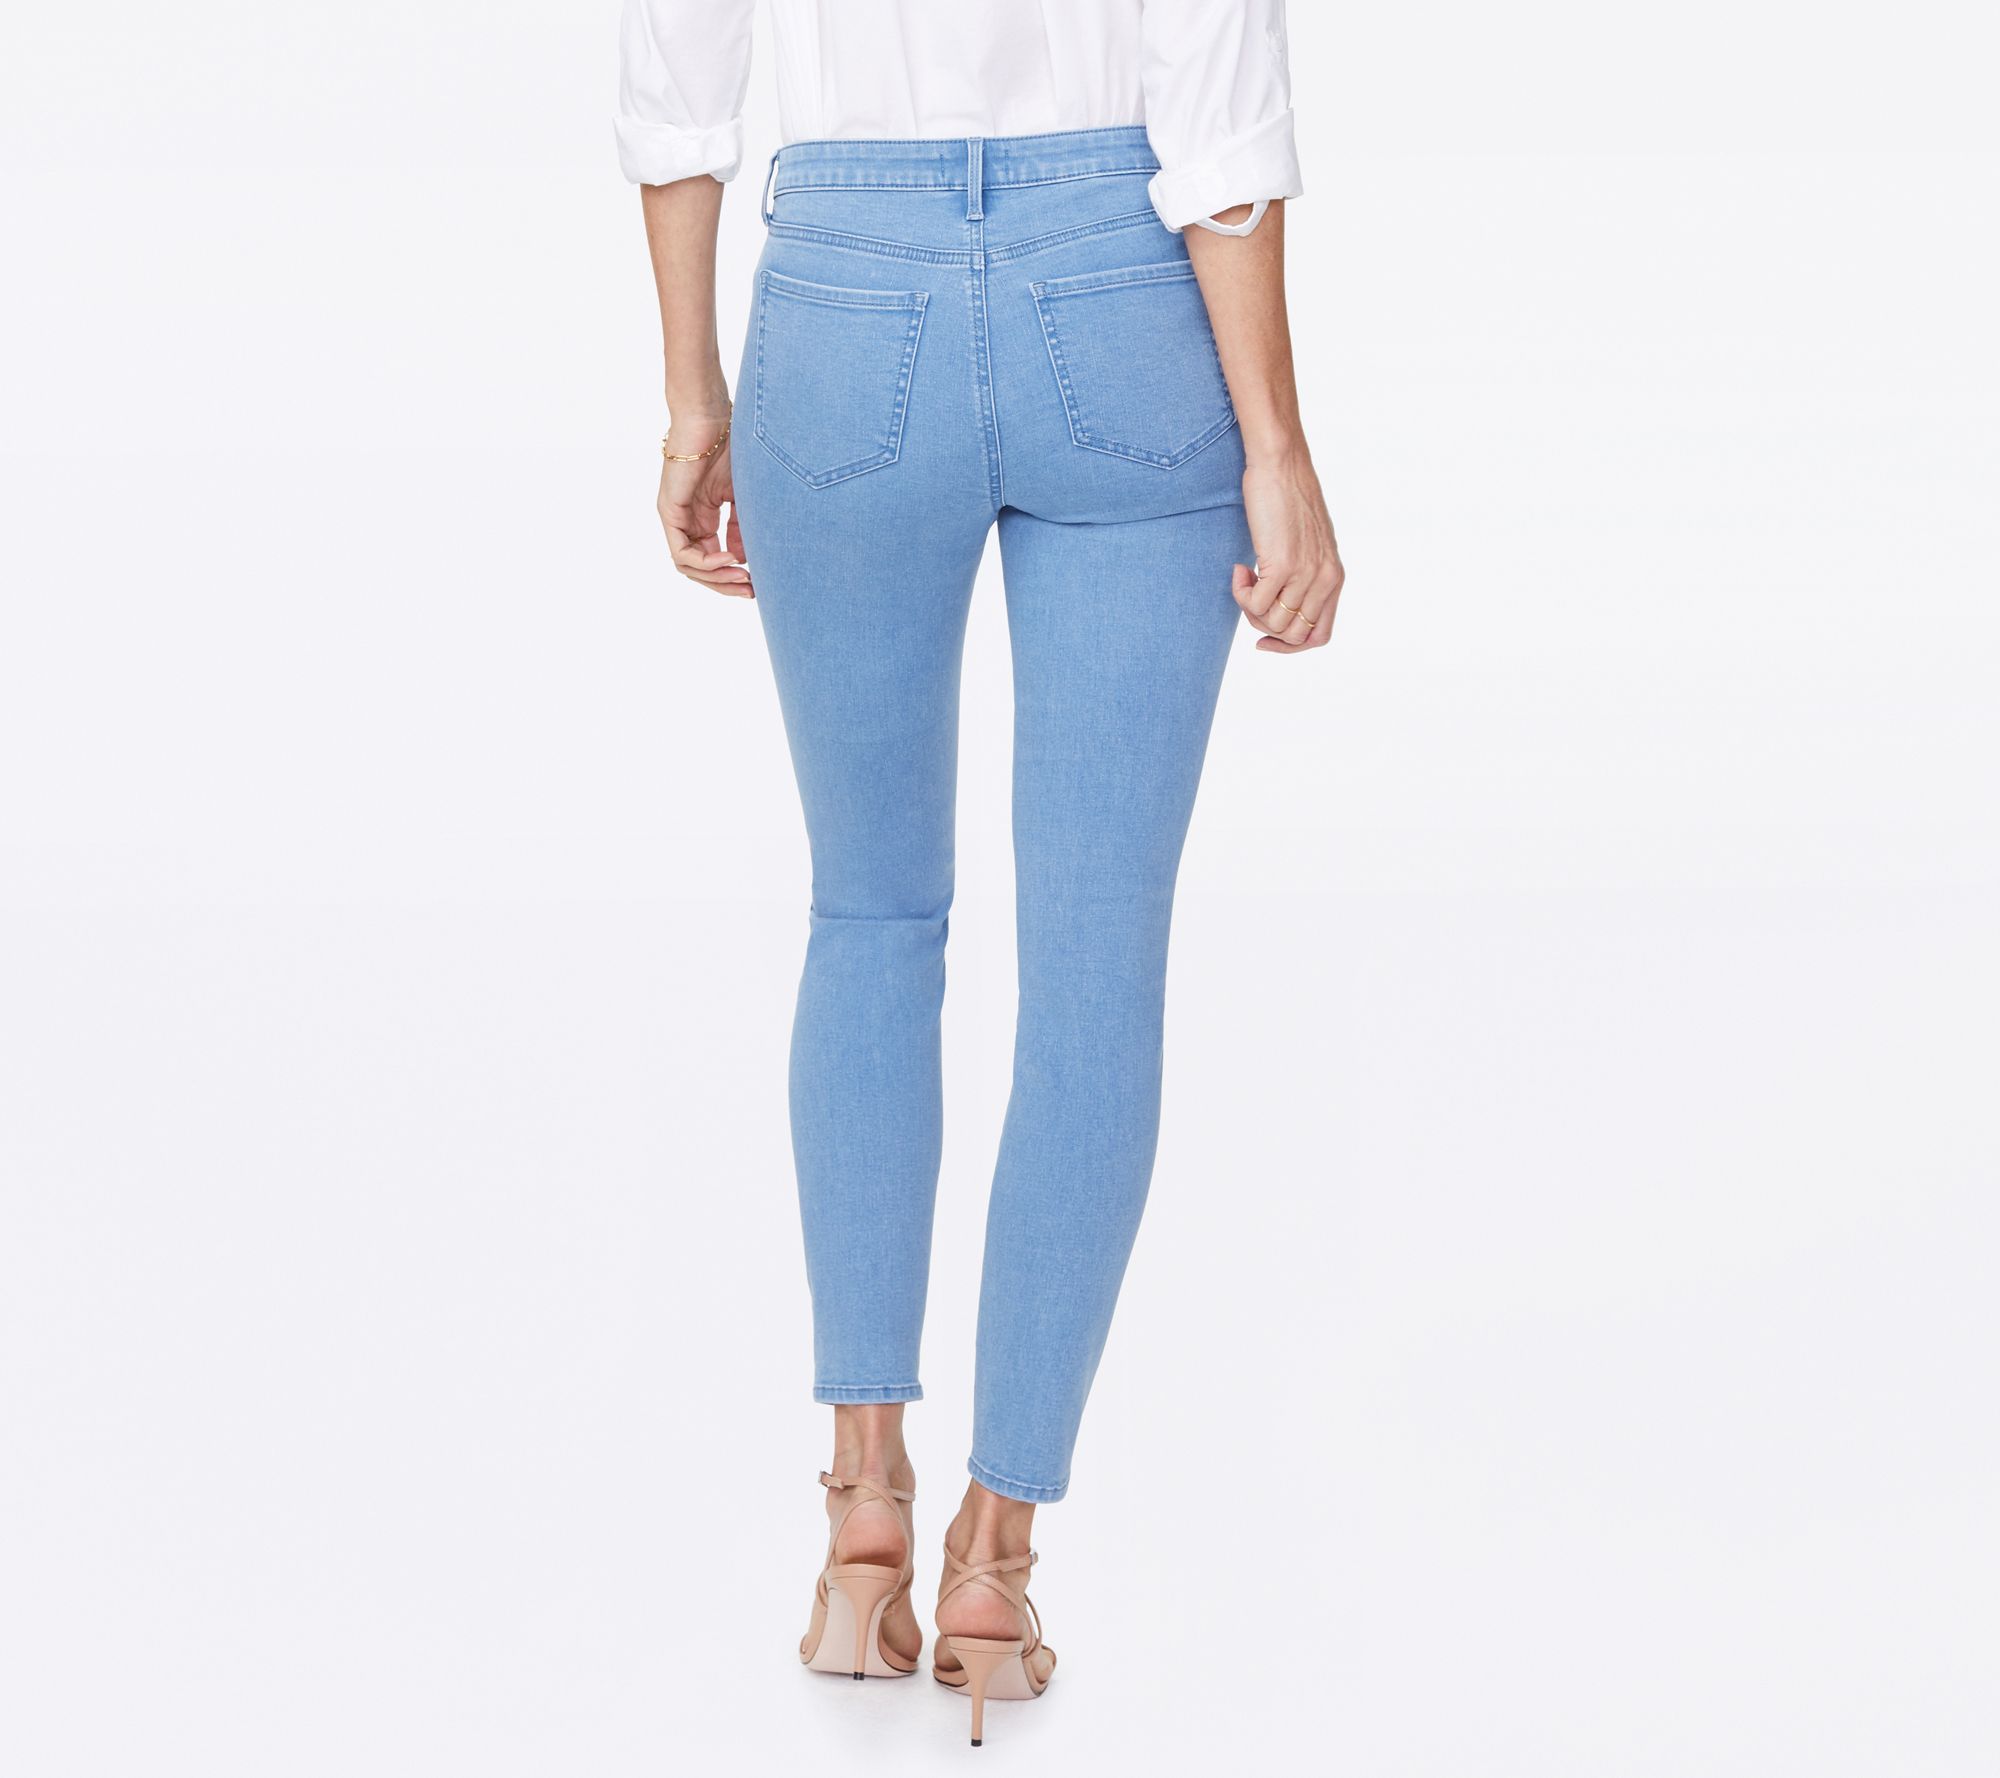 NYDJ Ami Ankle Exposed Button Fly Jeans - Belle Isle - QVC.com